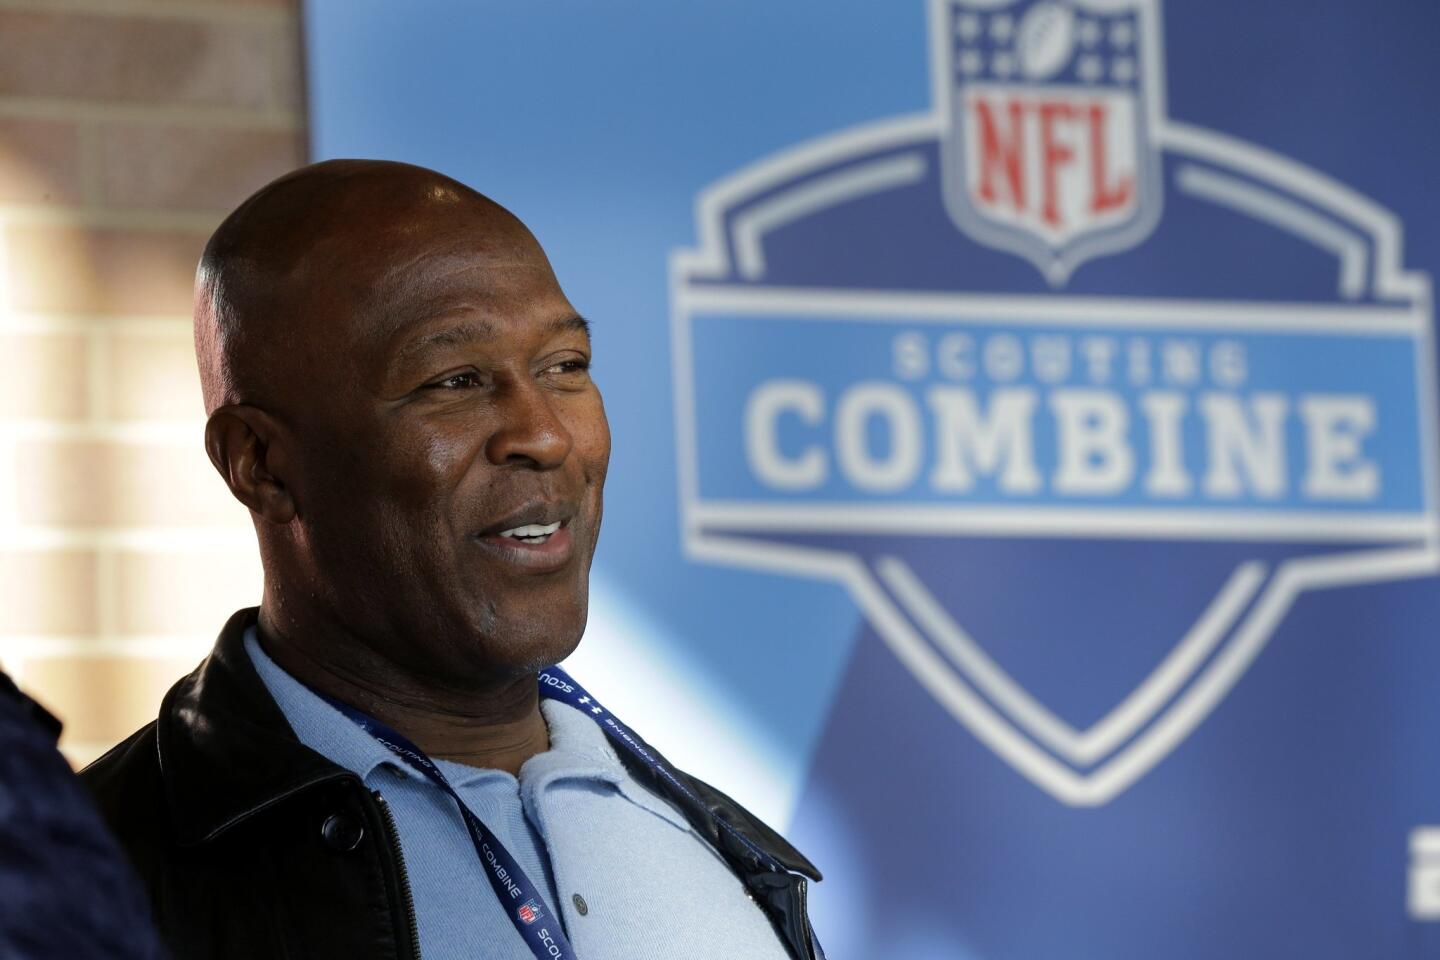 Buccaneers coach Lovie Smith waits for the start of a news conference at the NFL scouting combine in Indianapolis on Feb. 18, 2015.